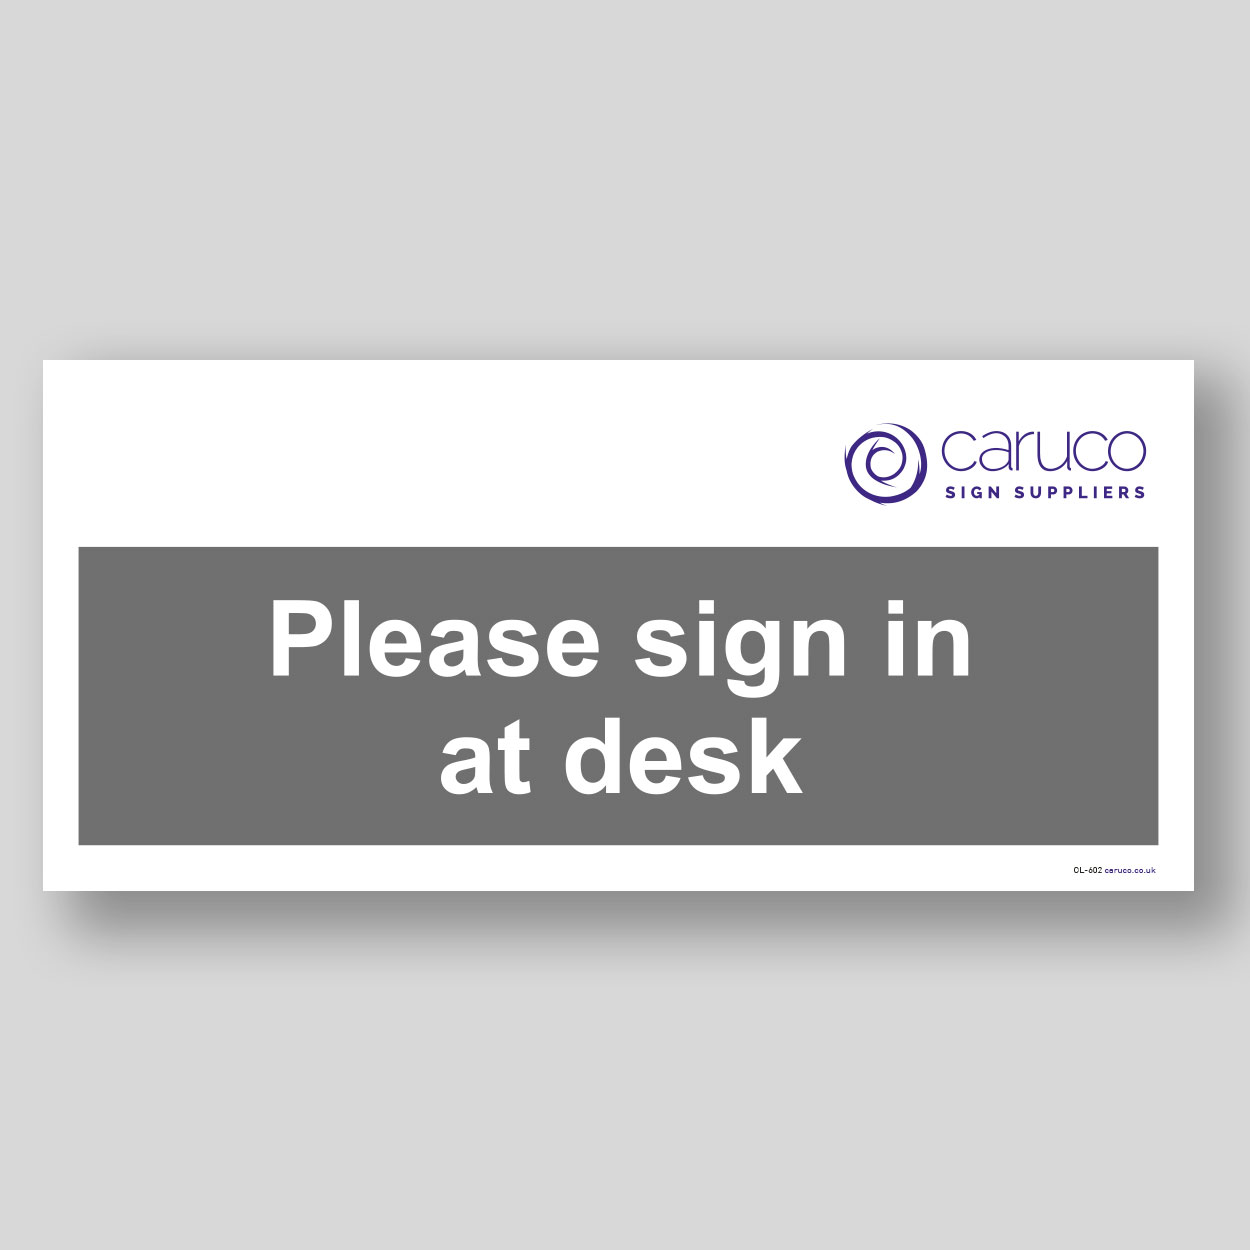 CL-602 Please sign in at desk